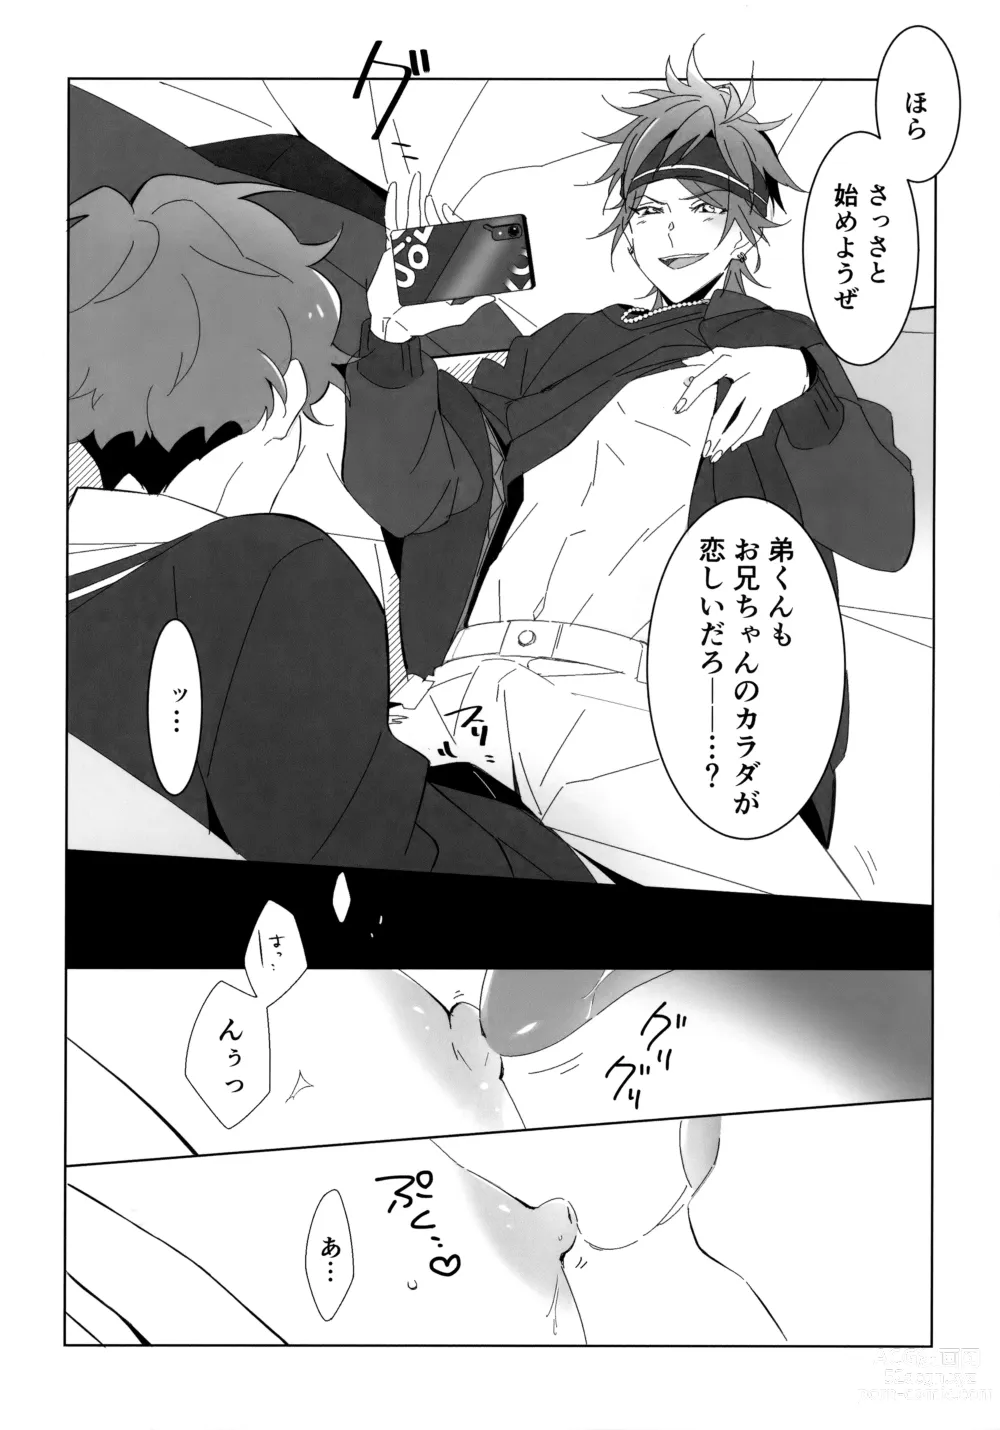 Page 33 of doujinshi H.M.D.R.